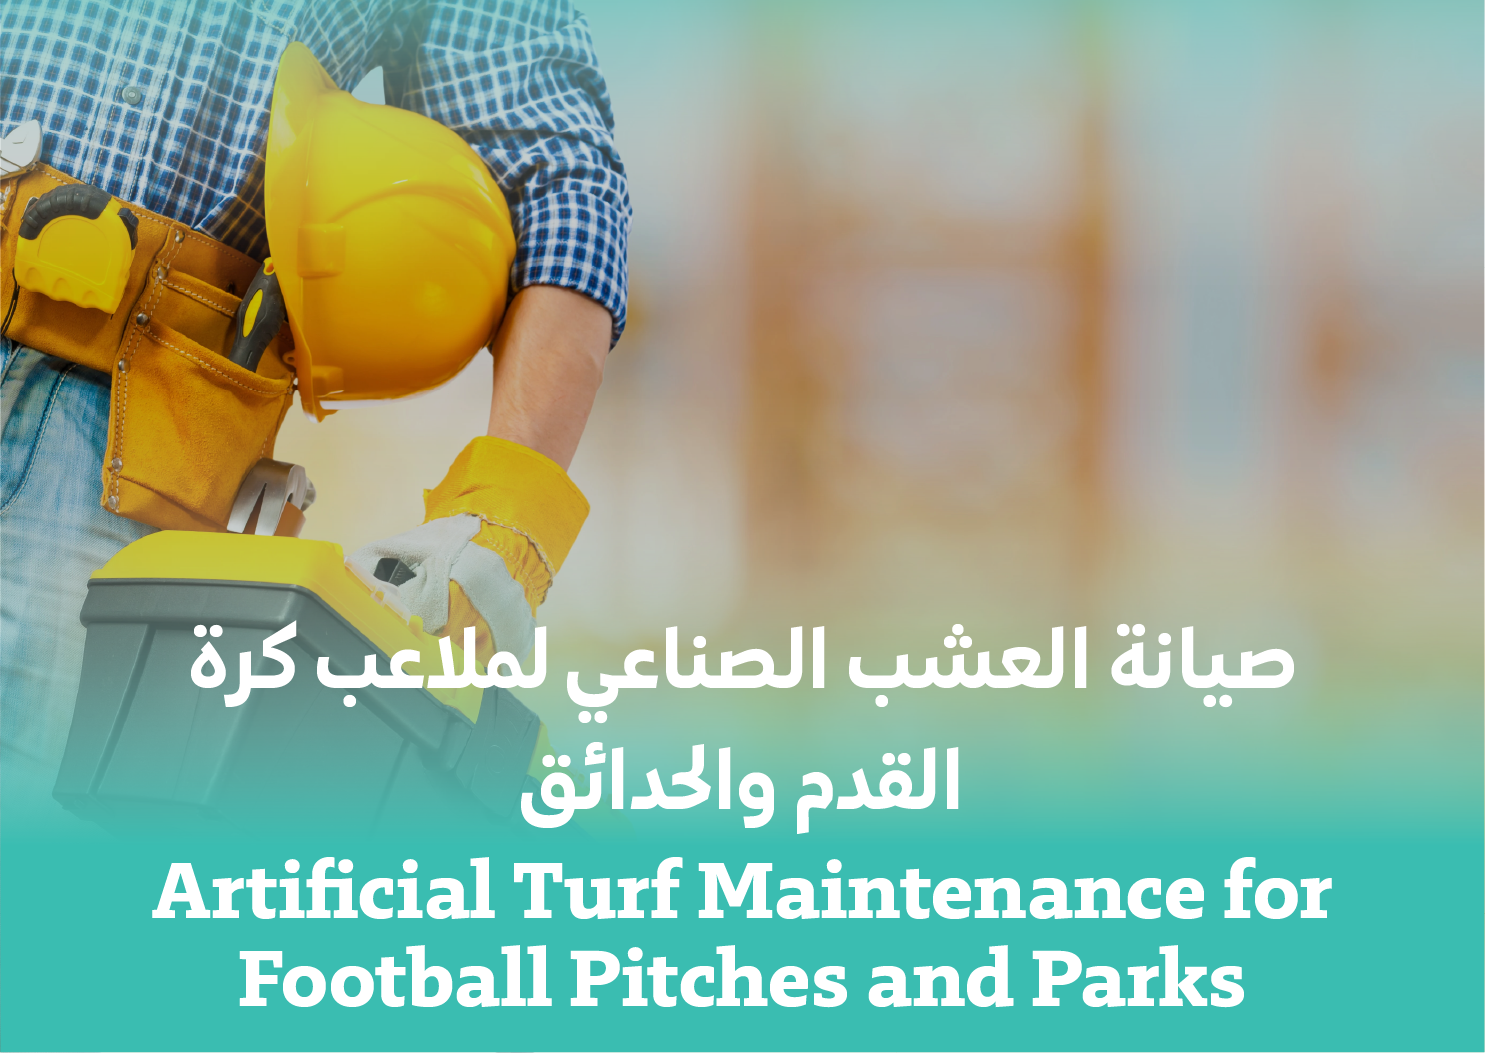 Artificial Turf Maintenance for Football Pitches and Parks